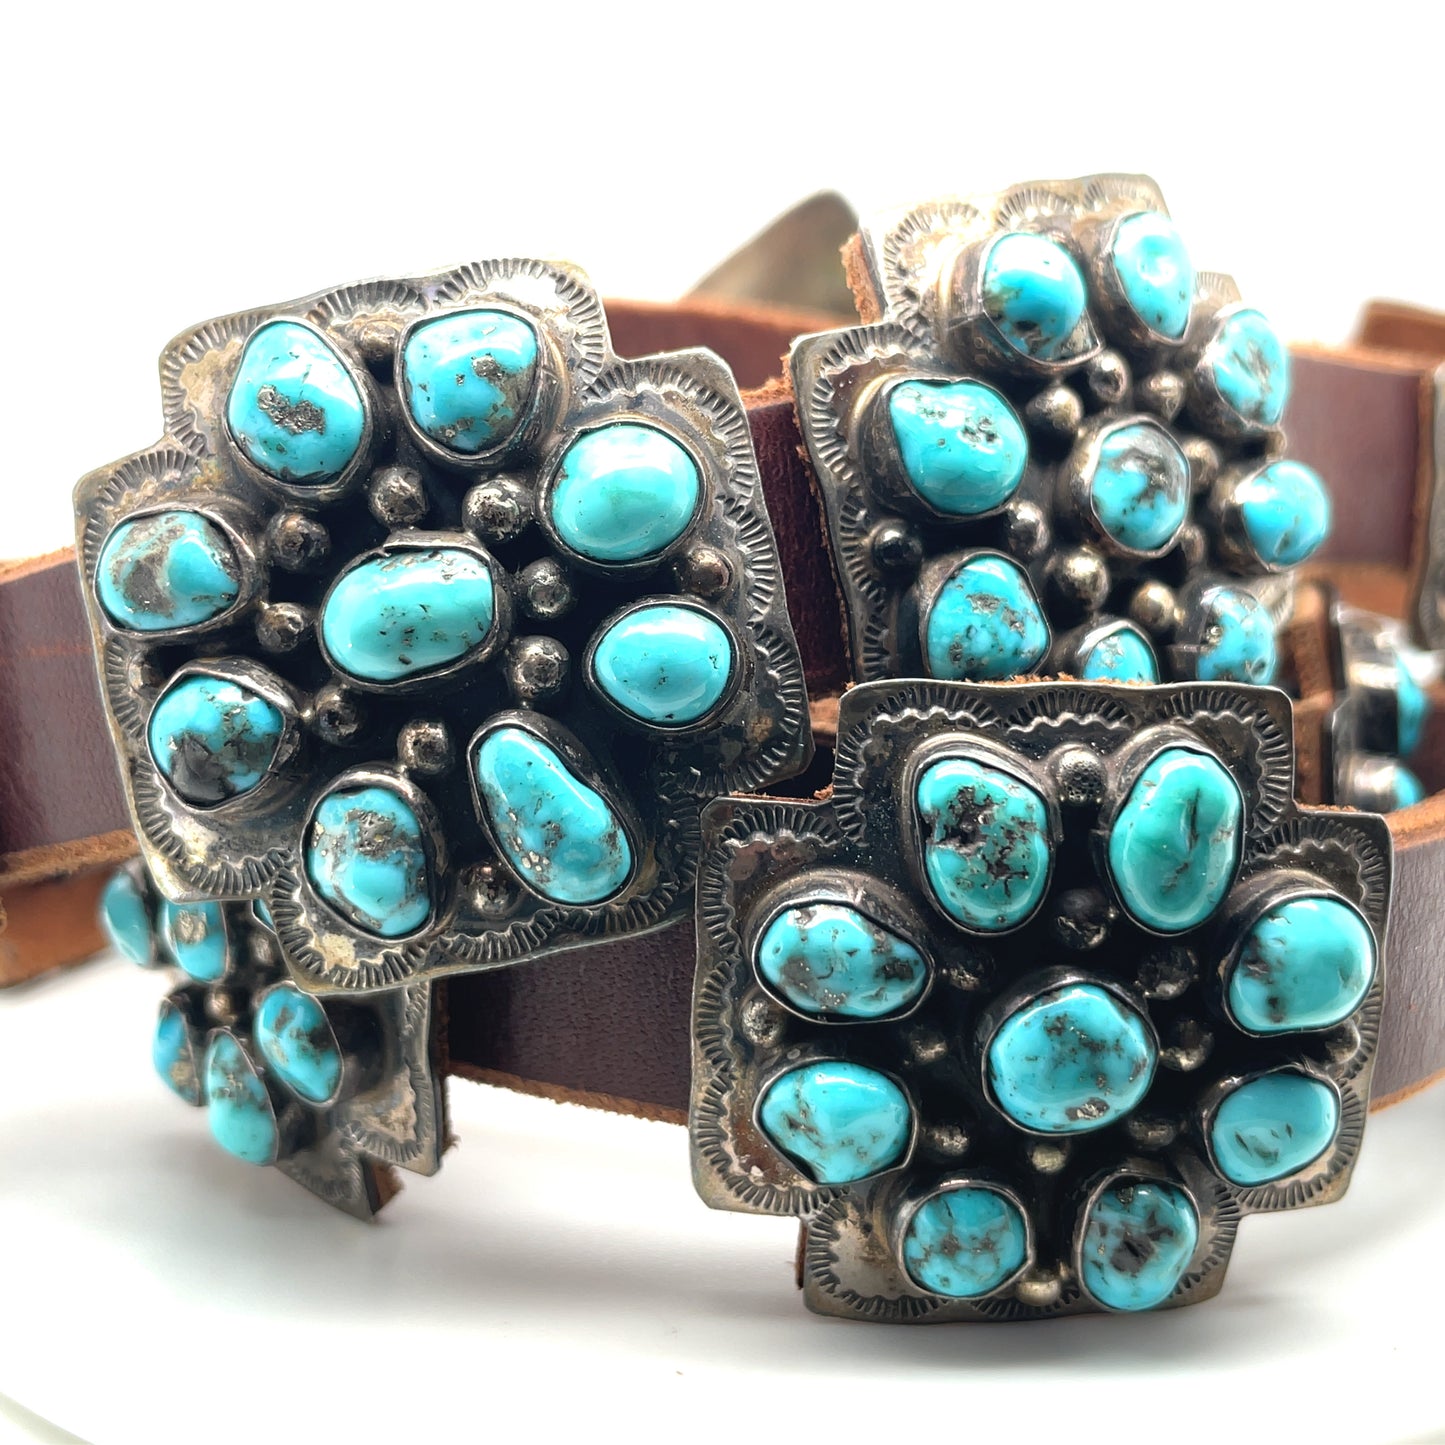 Vintage Morenci Turquoise and Sterling Silver Santa Fe Cross Belt Buckle and Conchos Daniel Martinez